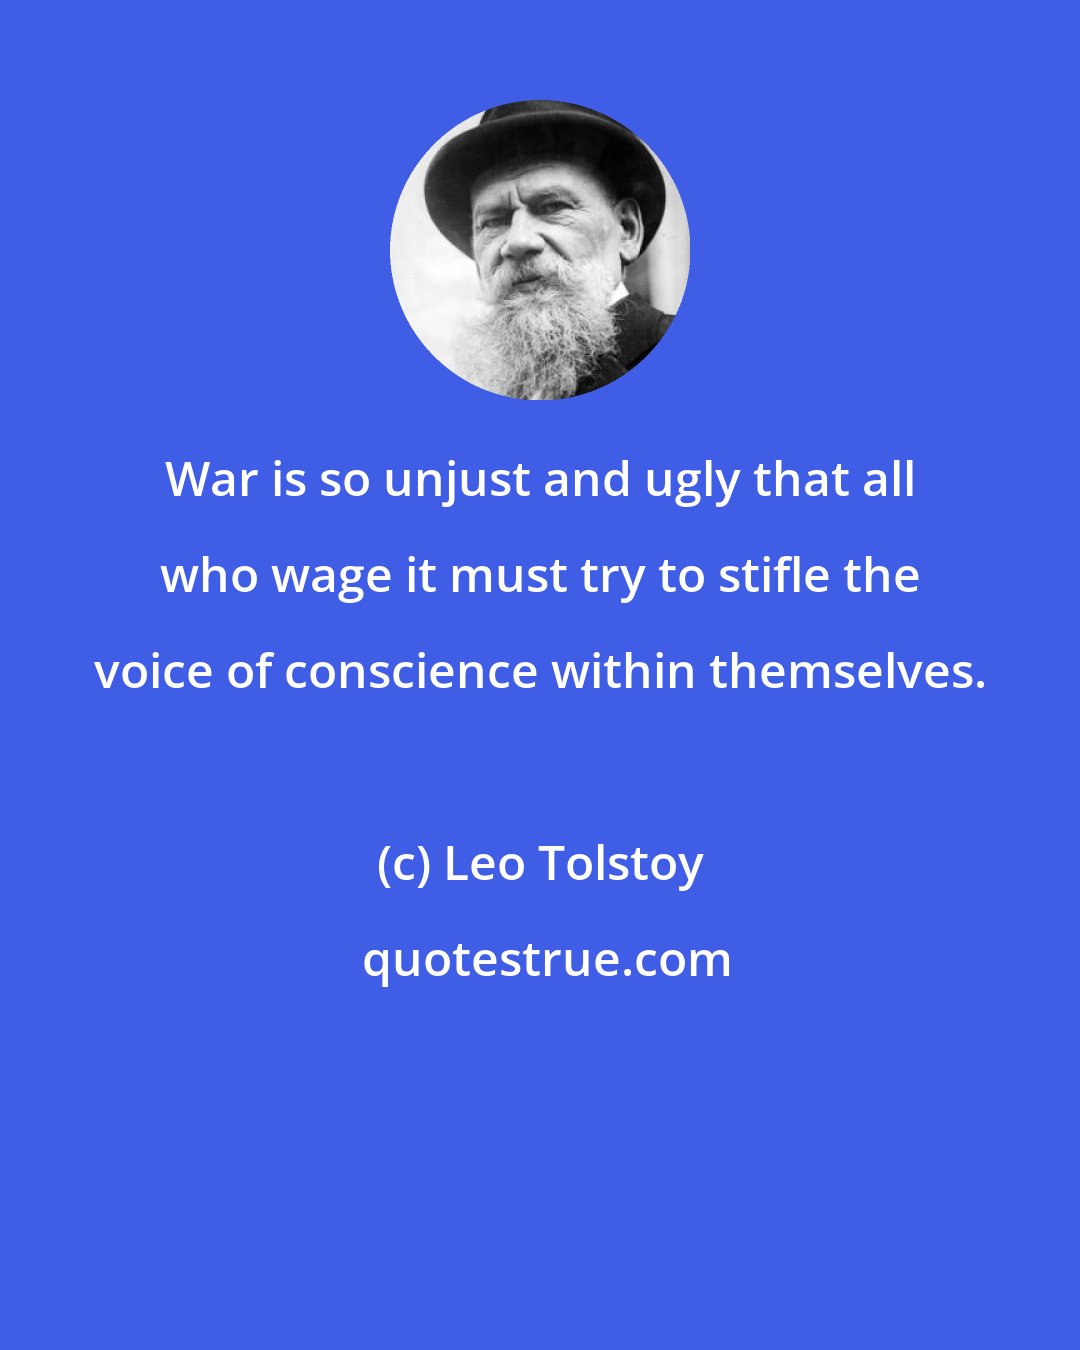 Leo Tolstoy: War is so unjust and ugly that all who wage it must try to stifle the voice of conscience within themselves.